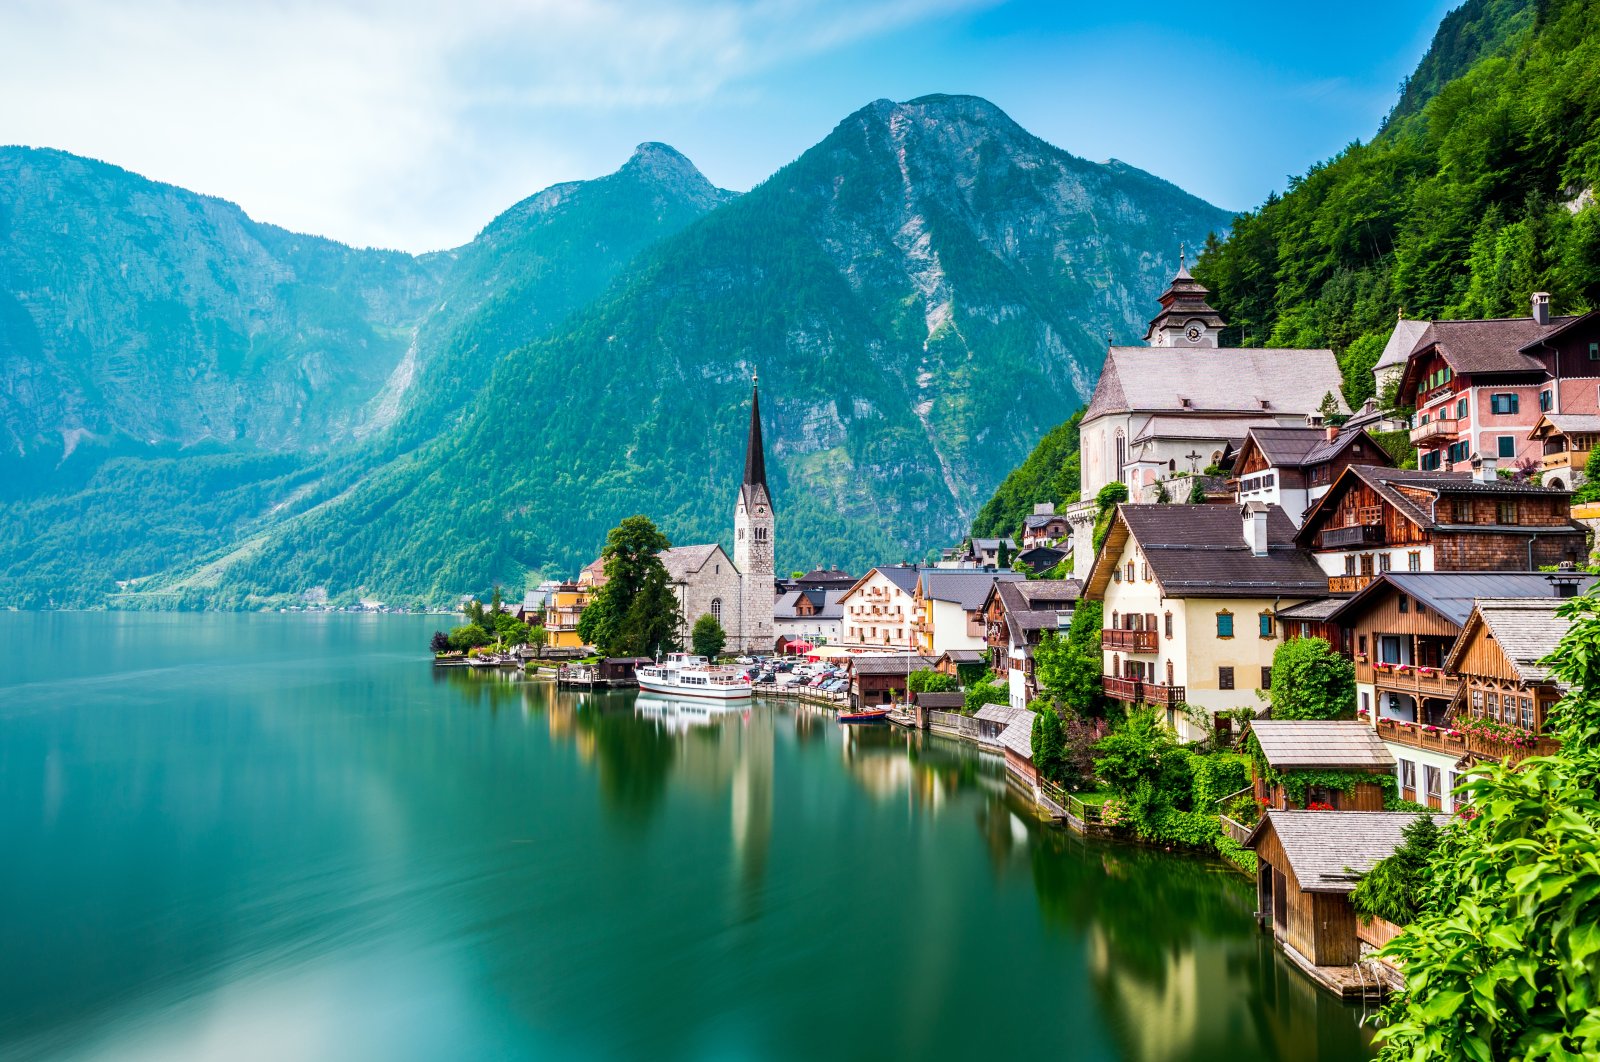 Located approximately three hours from Munich and 1.5 hours from Salzburg, this popular destination holds the distinction of being the only village in the world that has been cloned. (Getty Images Photo)